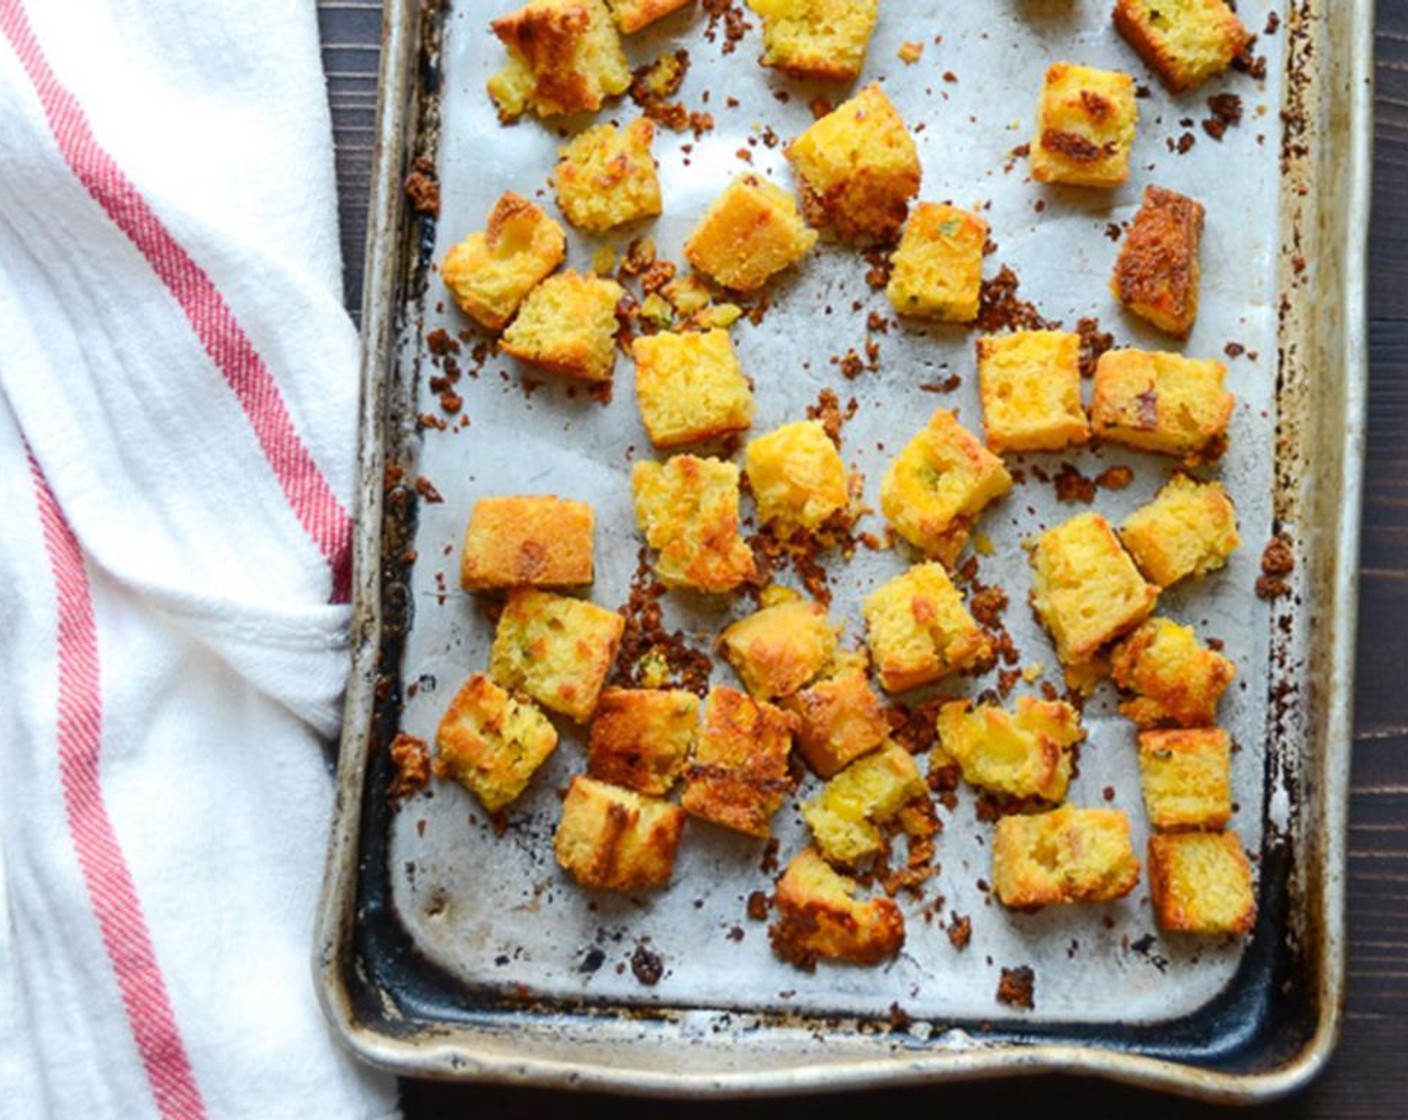 step 7 Stir the croutons and bake an additional 8 to 10 minutes until cornbread is browned and crisp. Set aside.